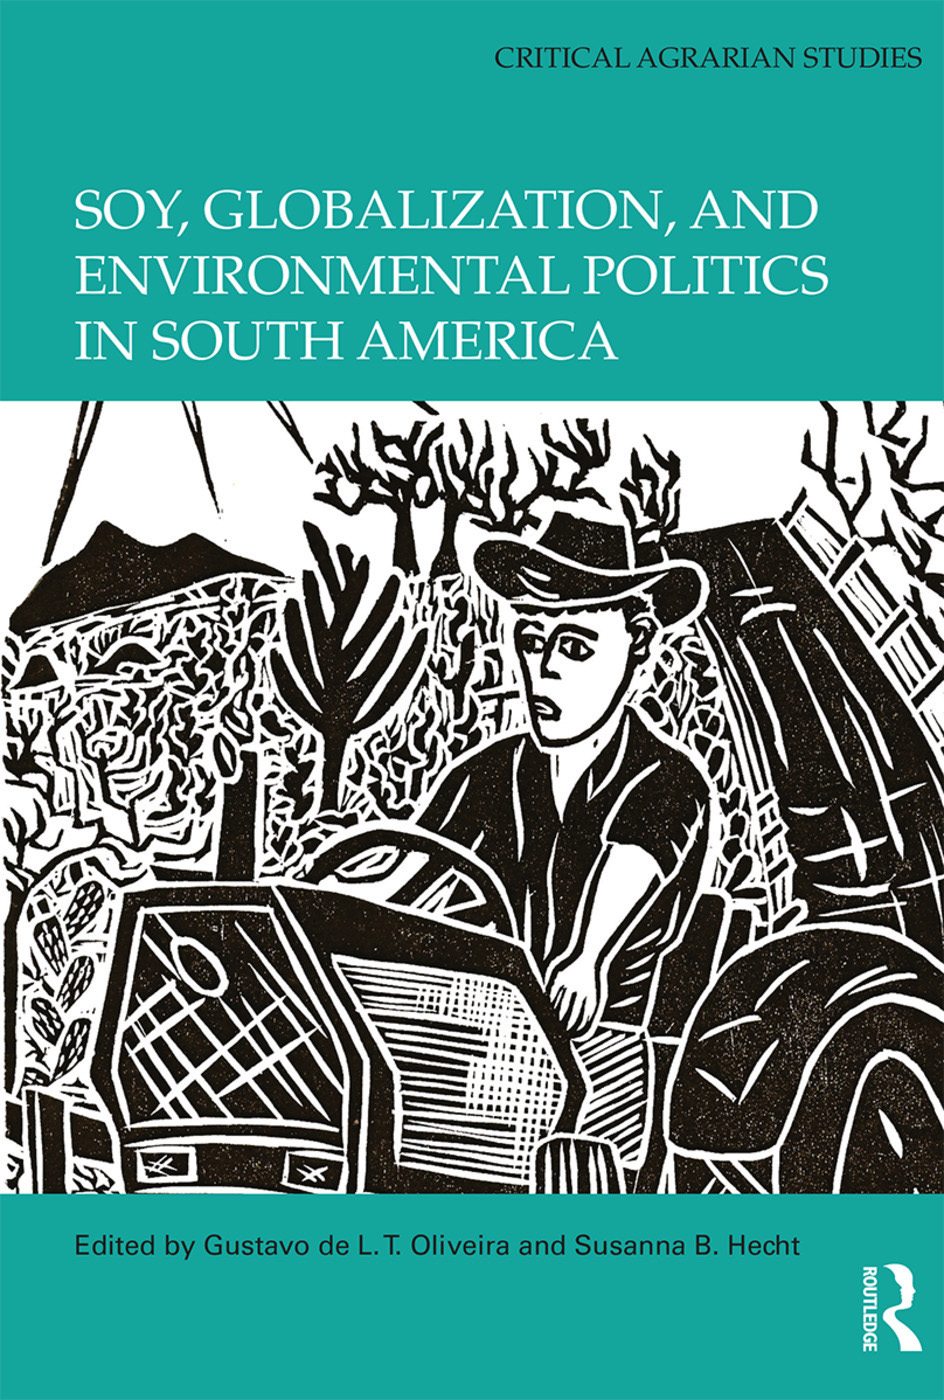 Soy, Globalization, and Environmental Politics in South America (Edited by Gustavo de L. T. Oliveira and Susanna B. Hecht) Promo Image